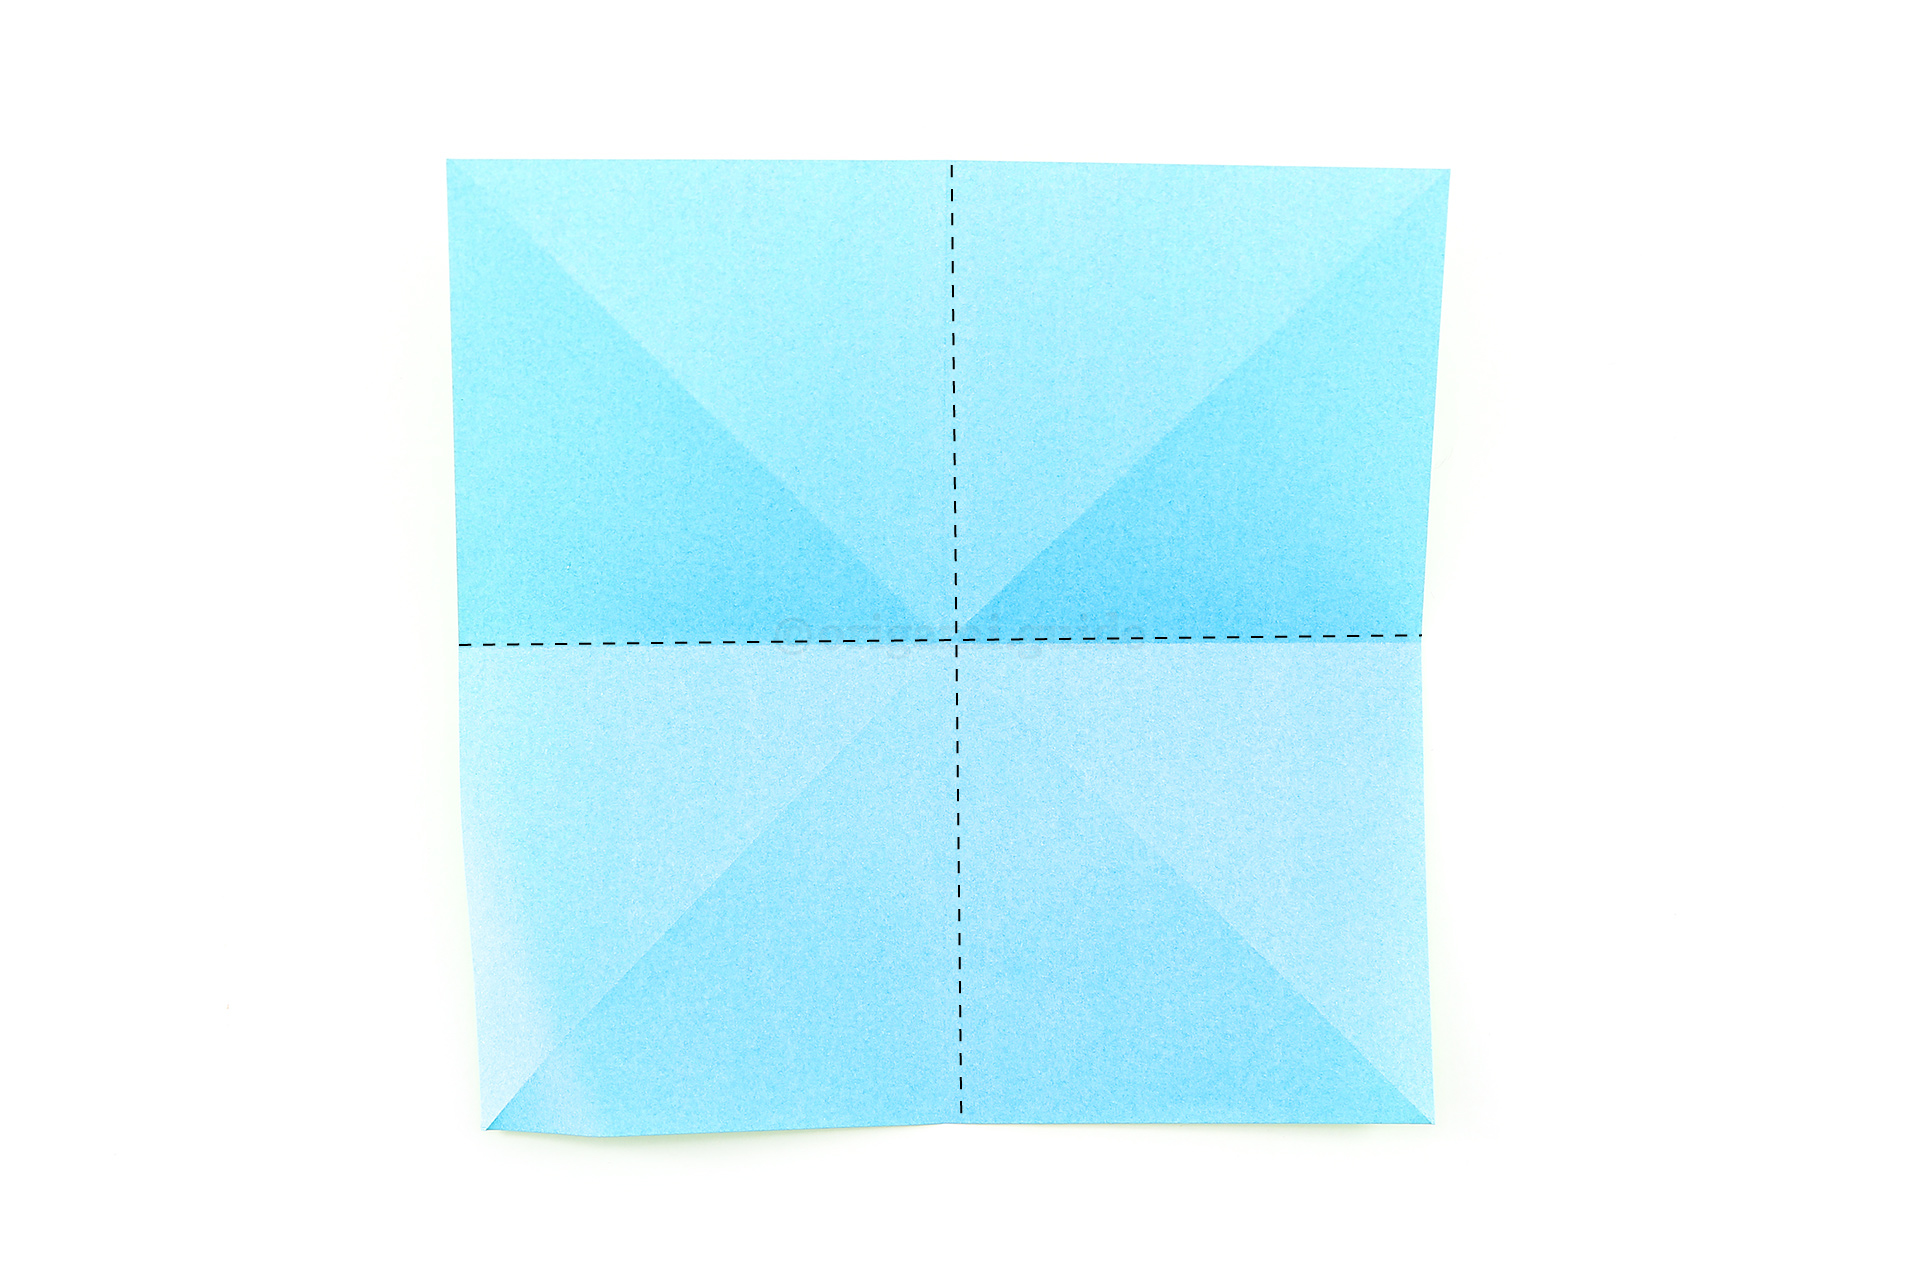 Flip the paper over. Fold the paper in half both ways to make horizontal and vertical creases.